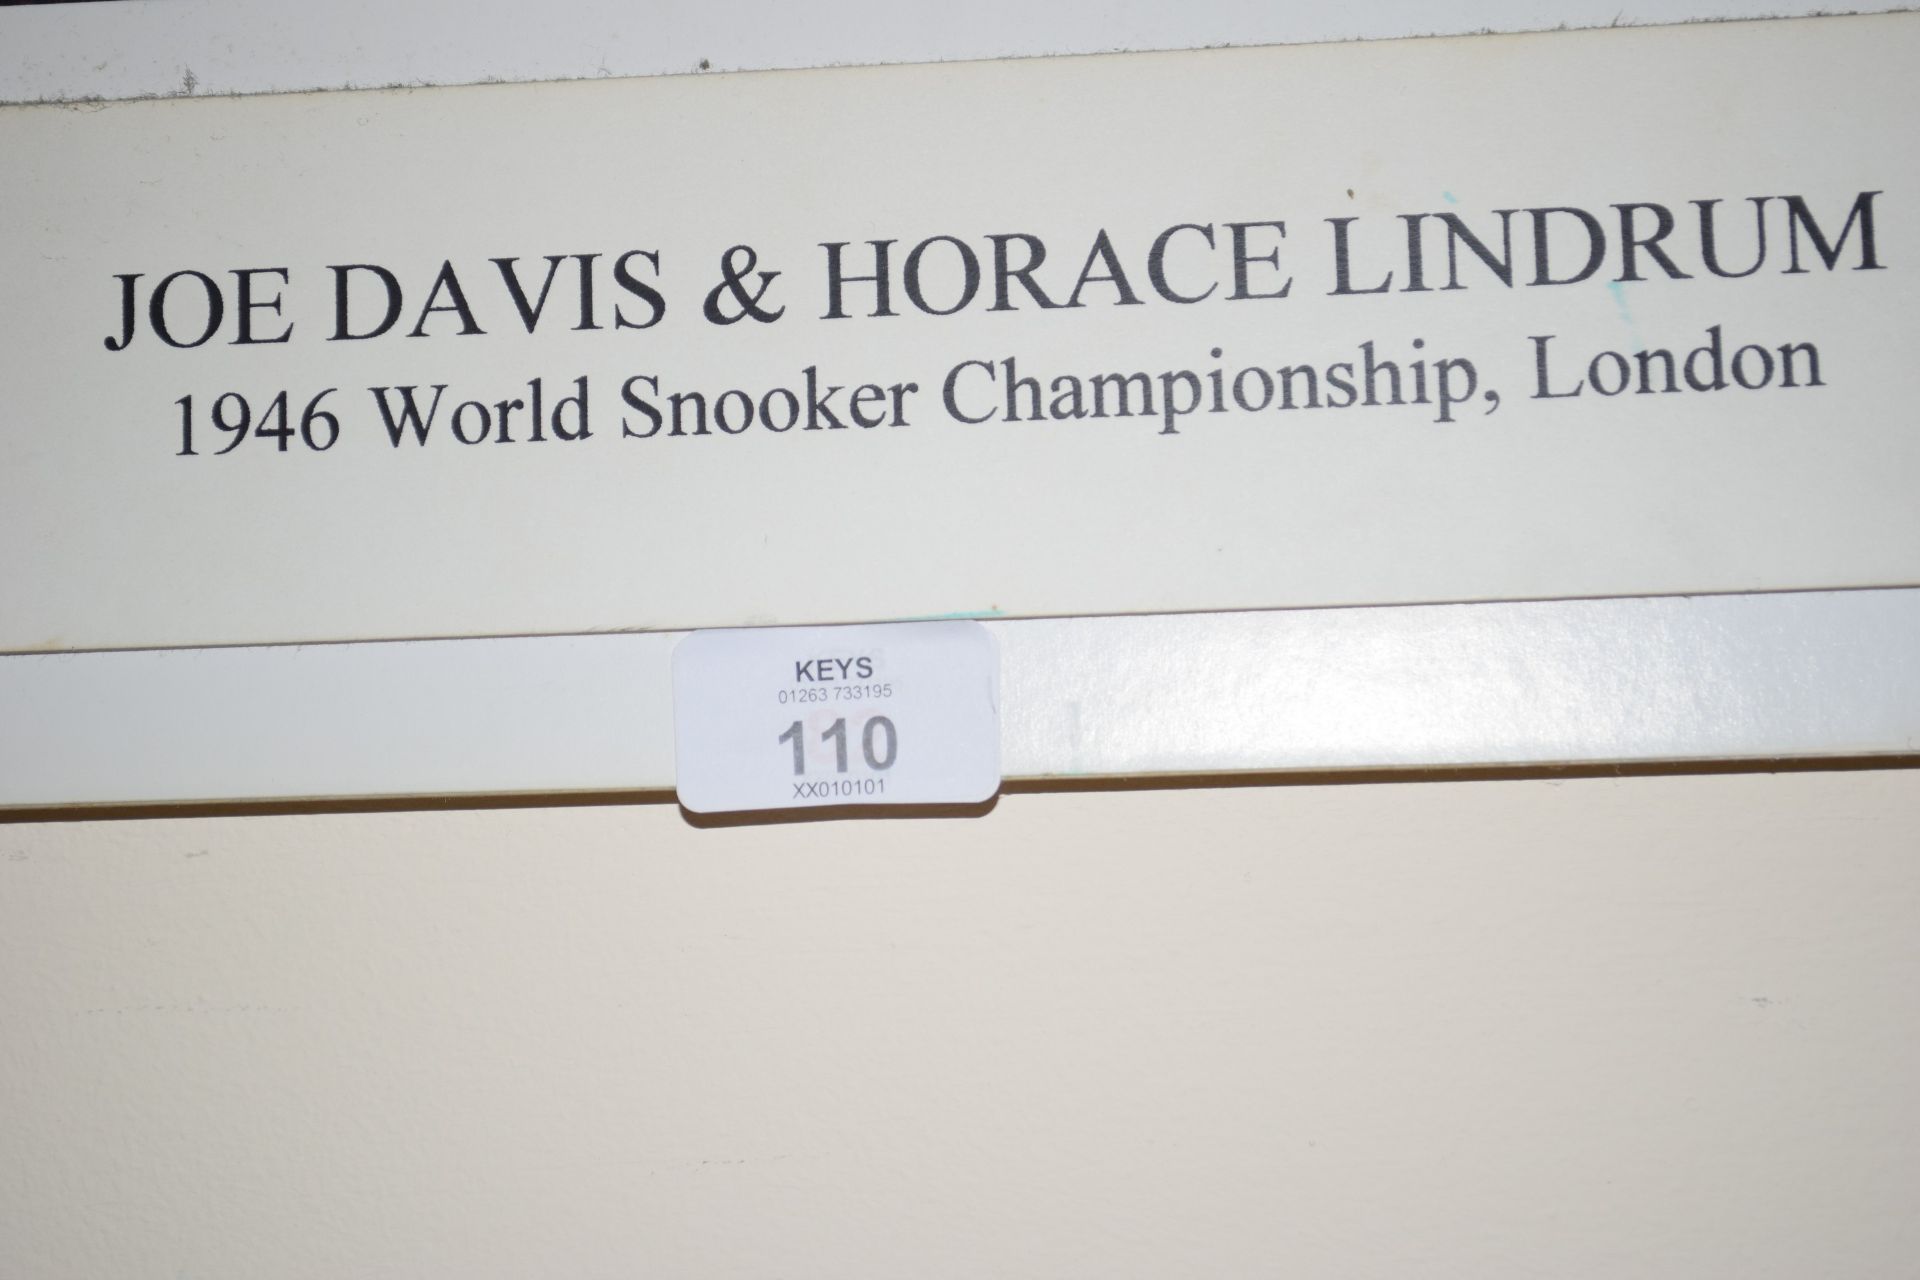 Poster of Joe Davis and Horace Lindrum 1946 World Snooker Championship in London, width 103cm - Image 2 of 2